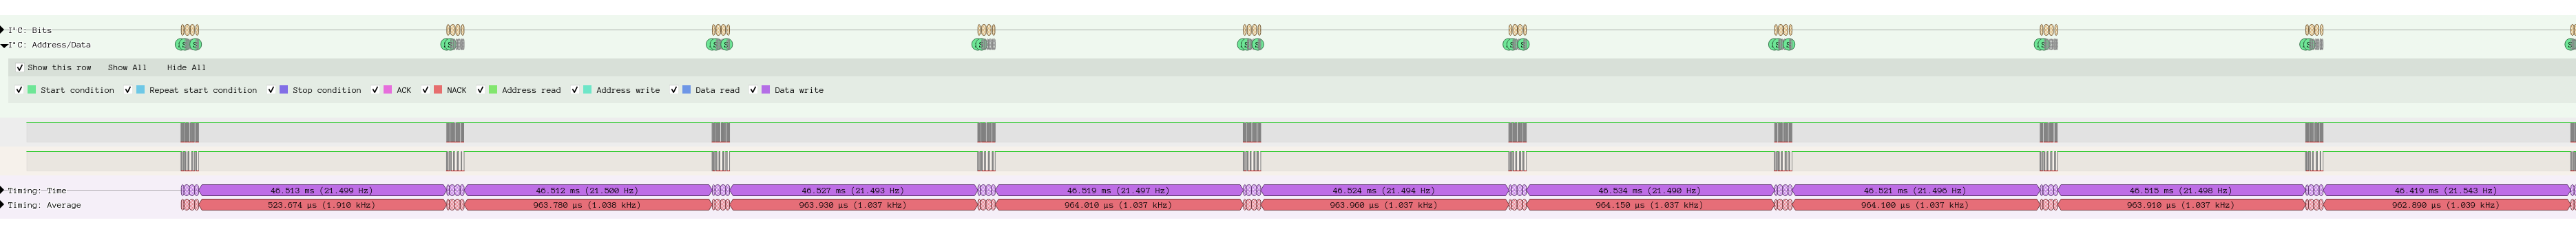 A screenshot from Pulseview showing bursts of i2c communication